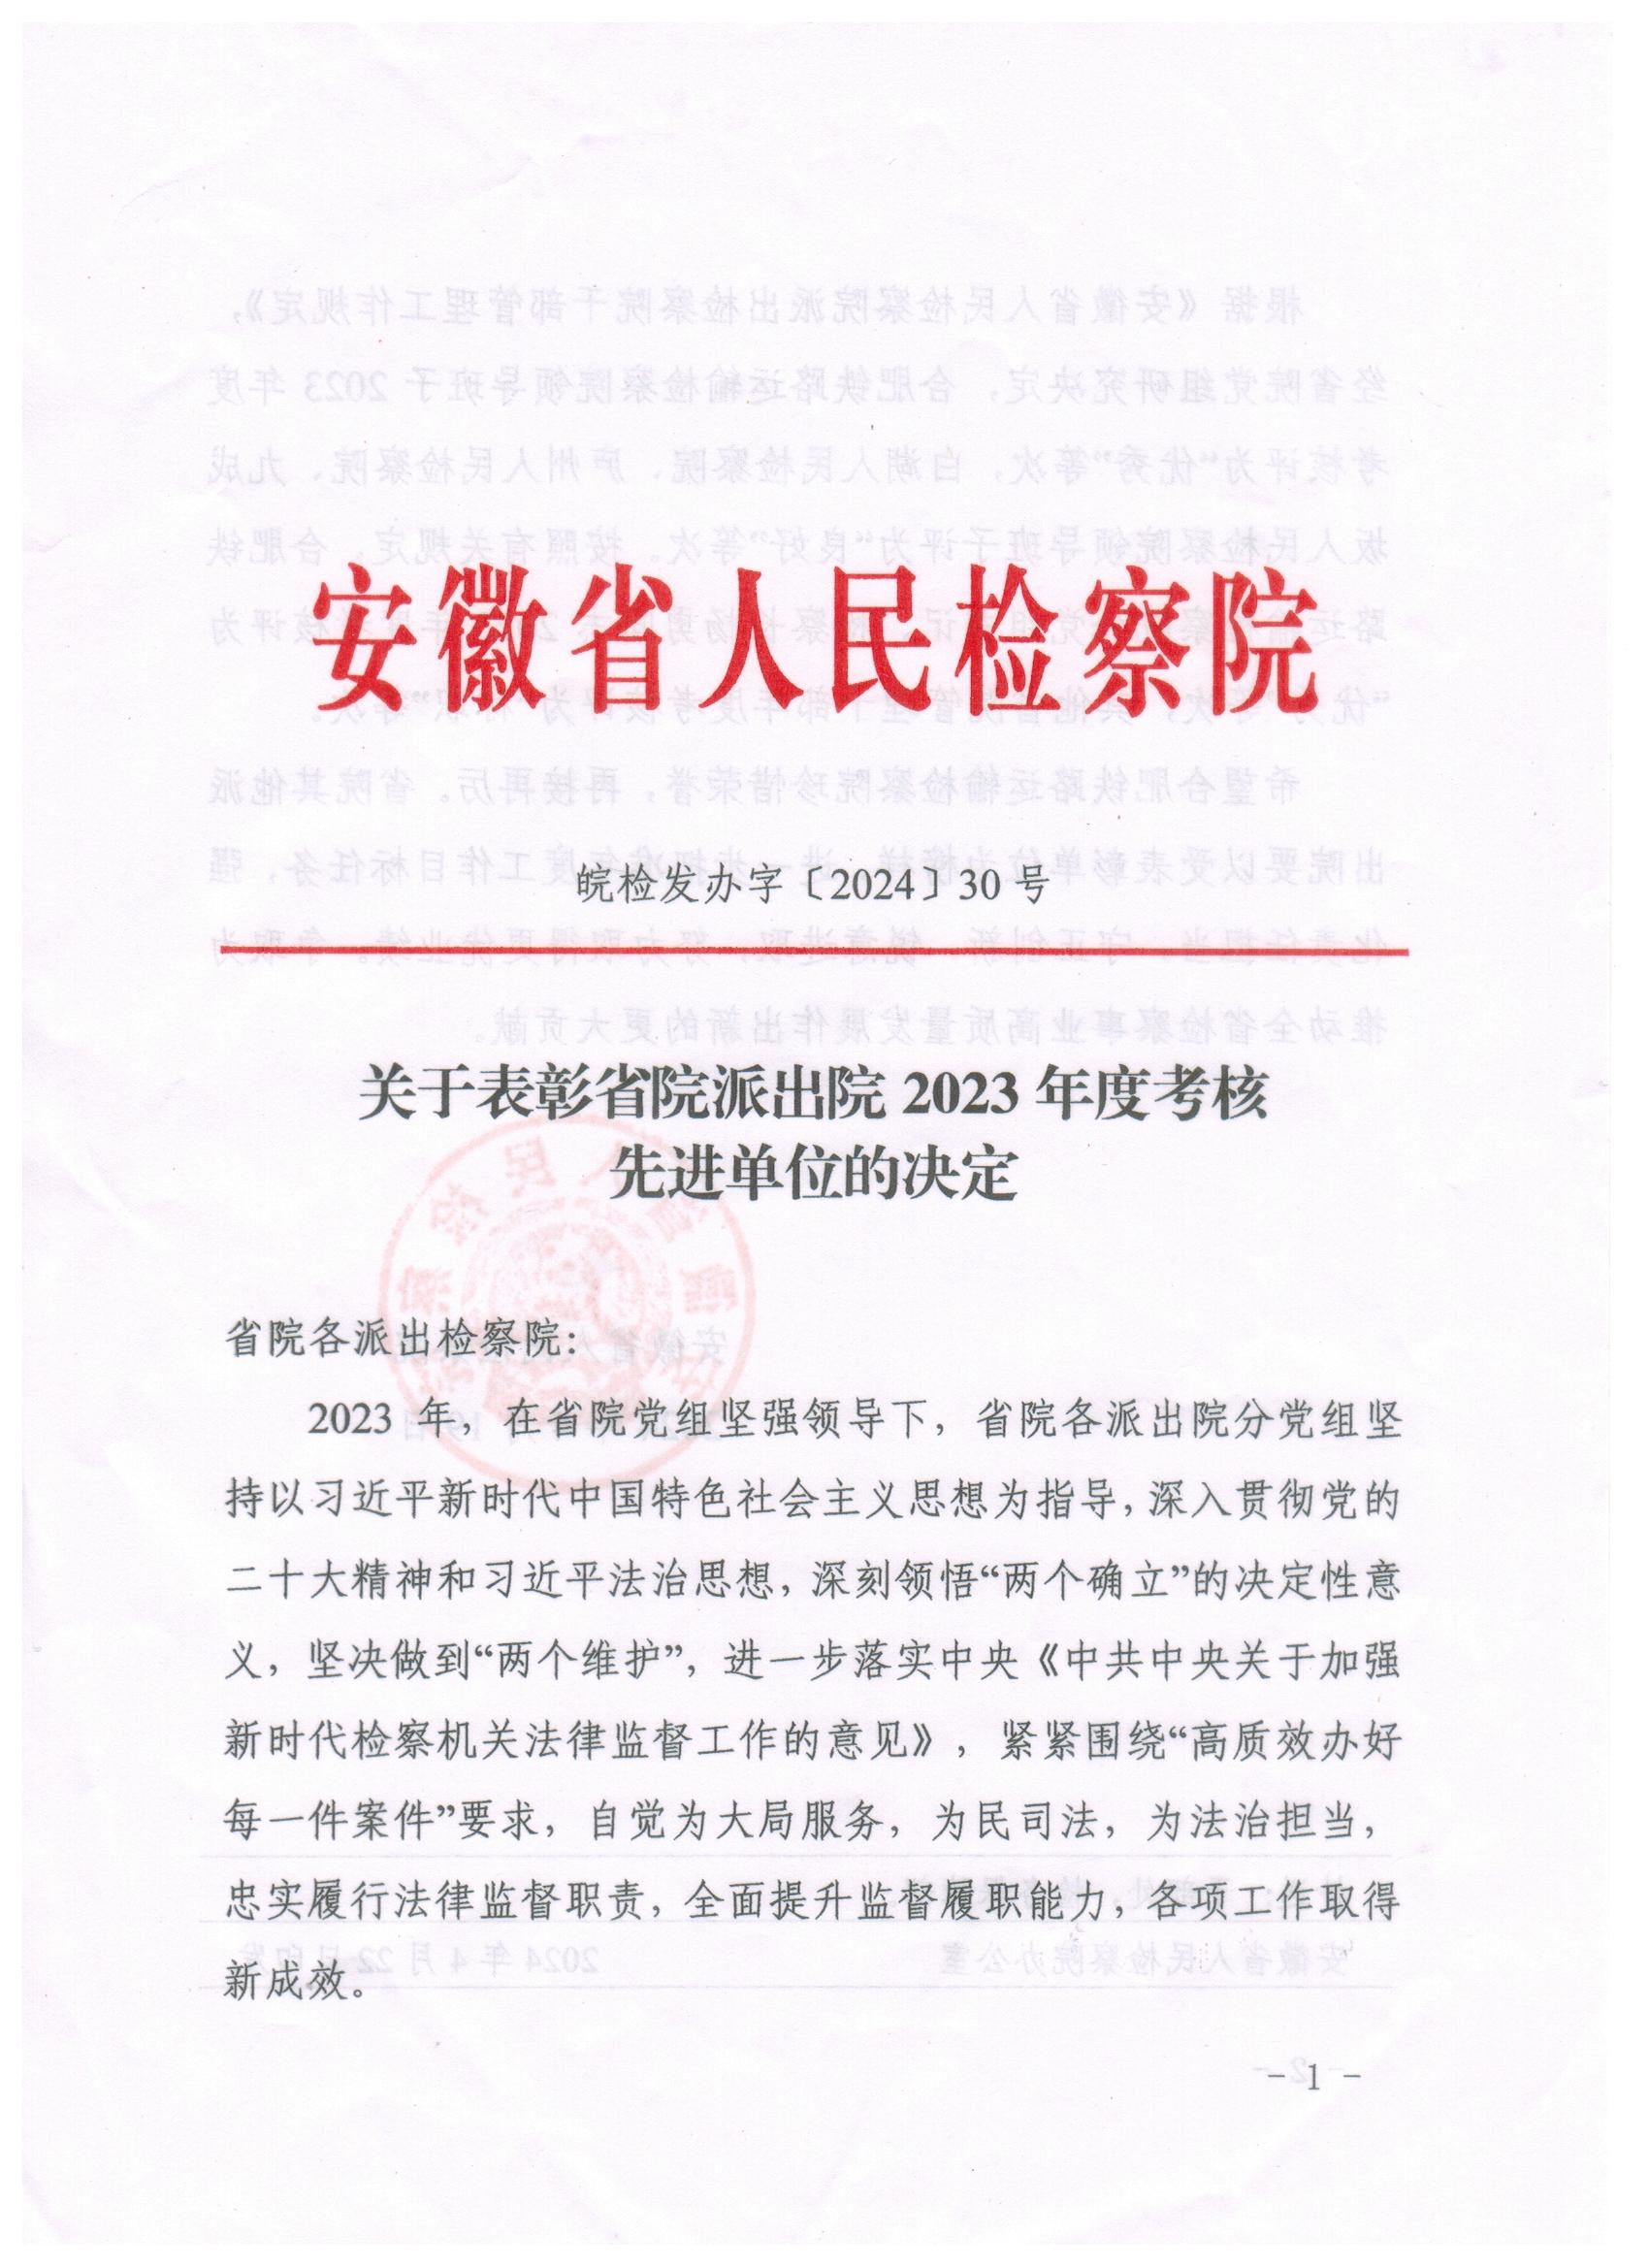  Good news! Hefei Railway Transport Procuratorate was awarded the "Excellent" grade in the assessment of the discharge leading group sent by Anhui Provincial People's Government